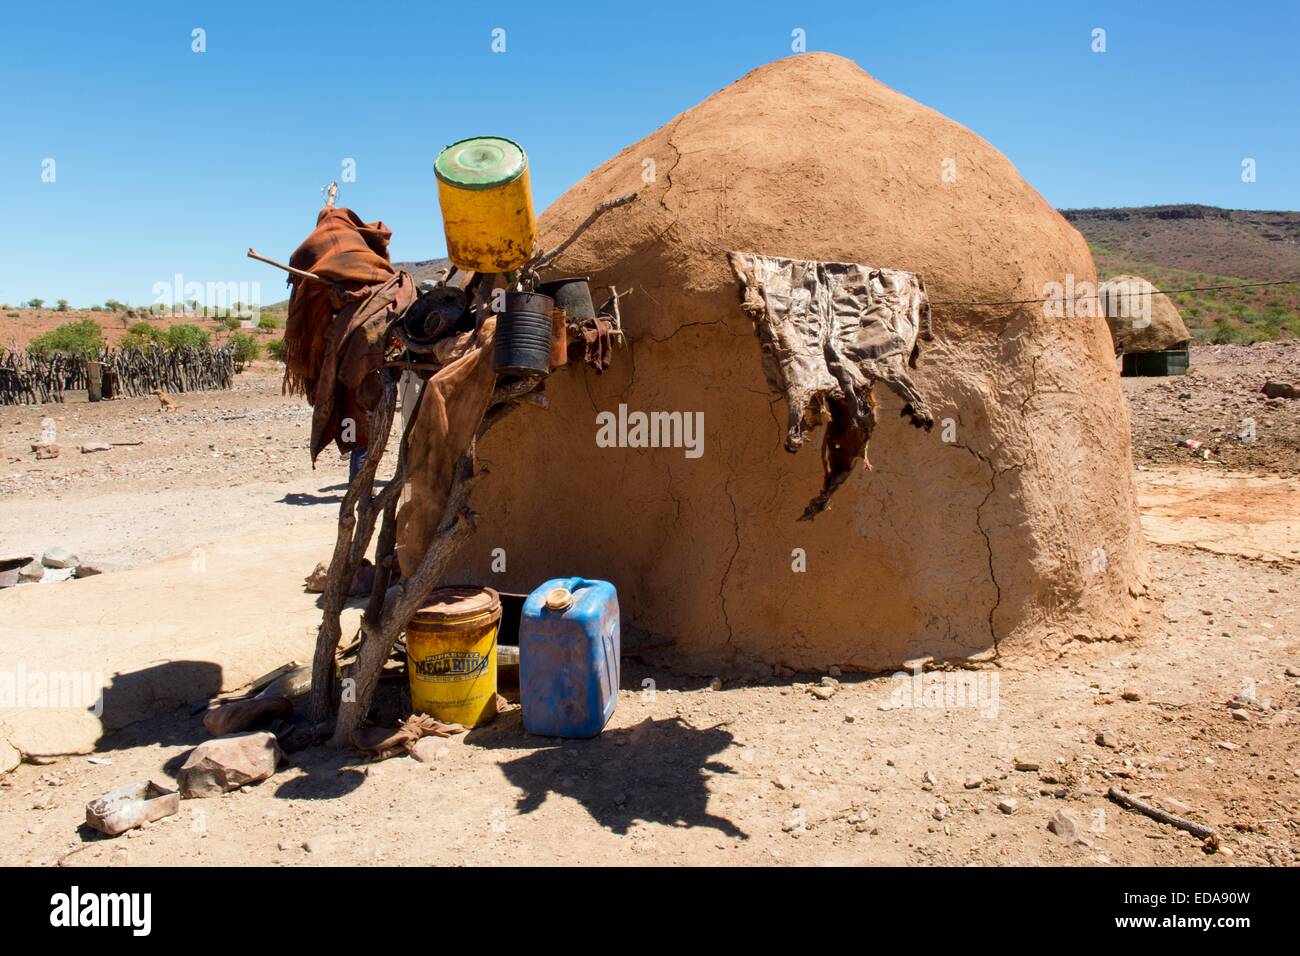 A mud hut dwelling, part of a Himba tribe village in Damaraland, northern Namibia, Africa. Stock Photo